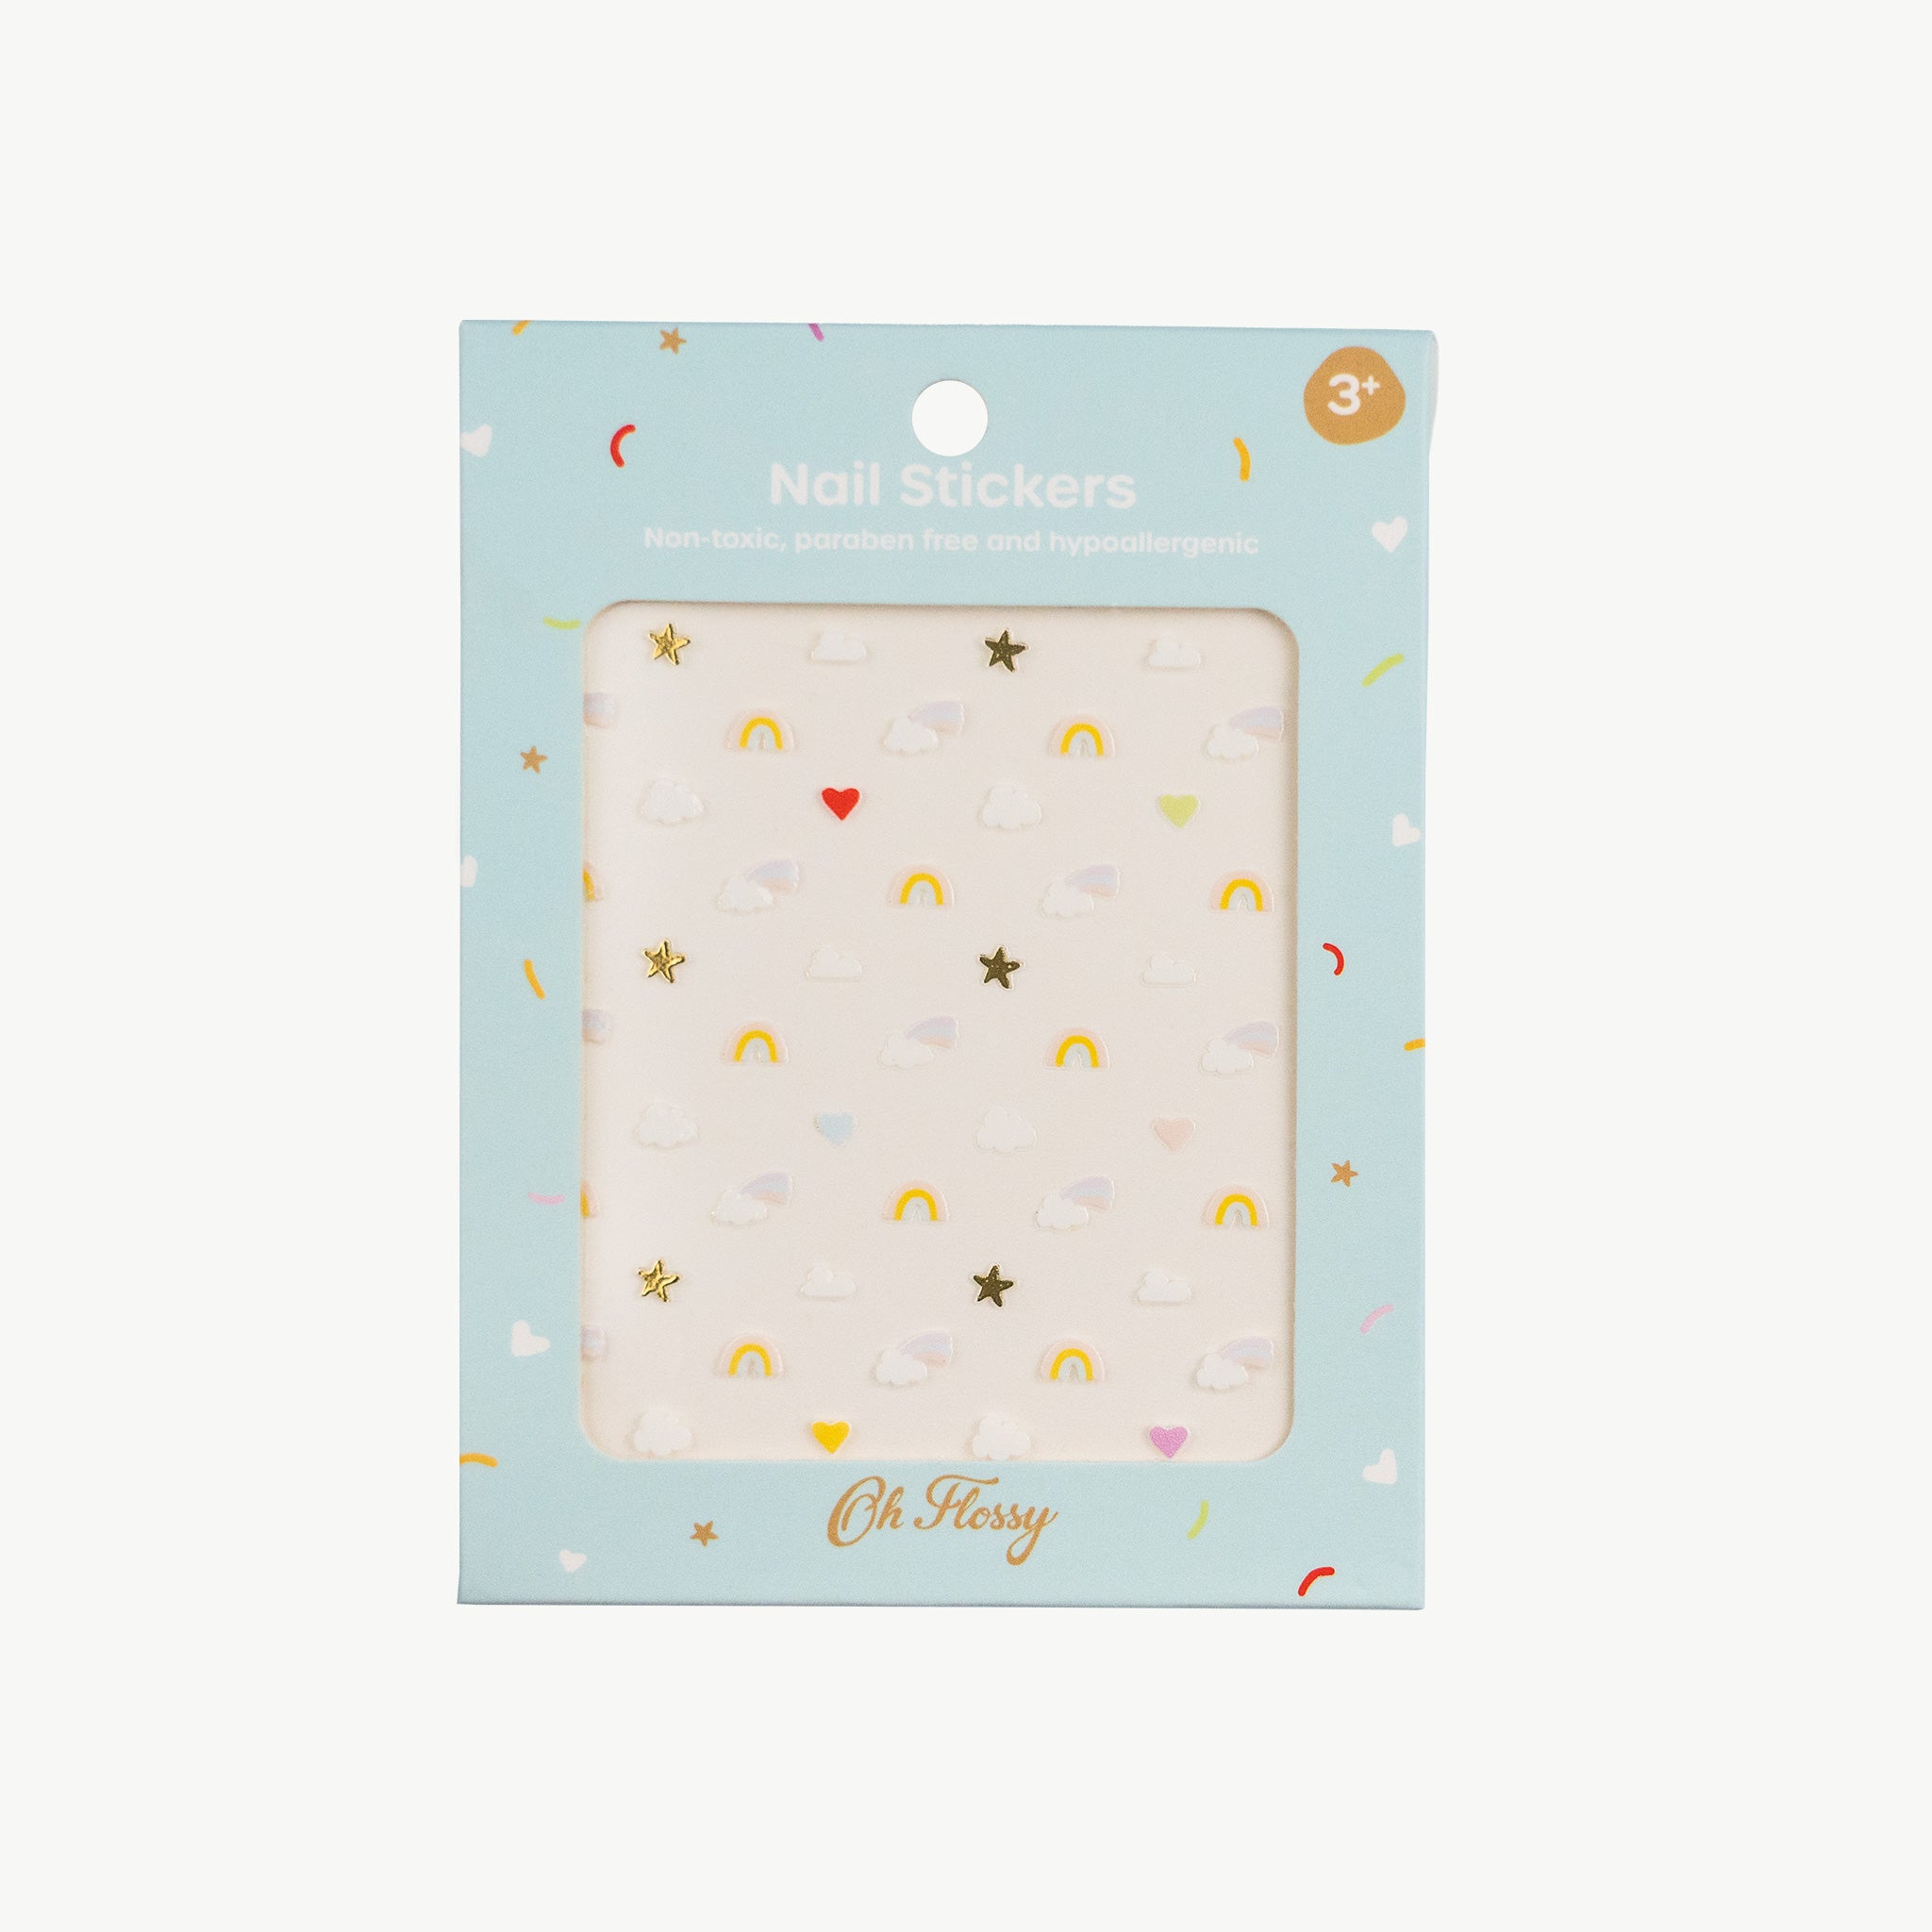 Oh-Flossy-Kids-Natural-Makeup-Nail-Stickers-Sky